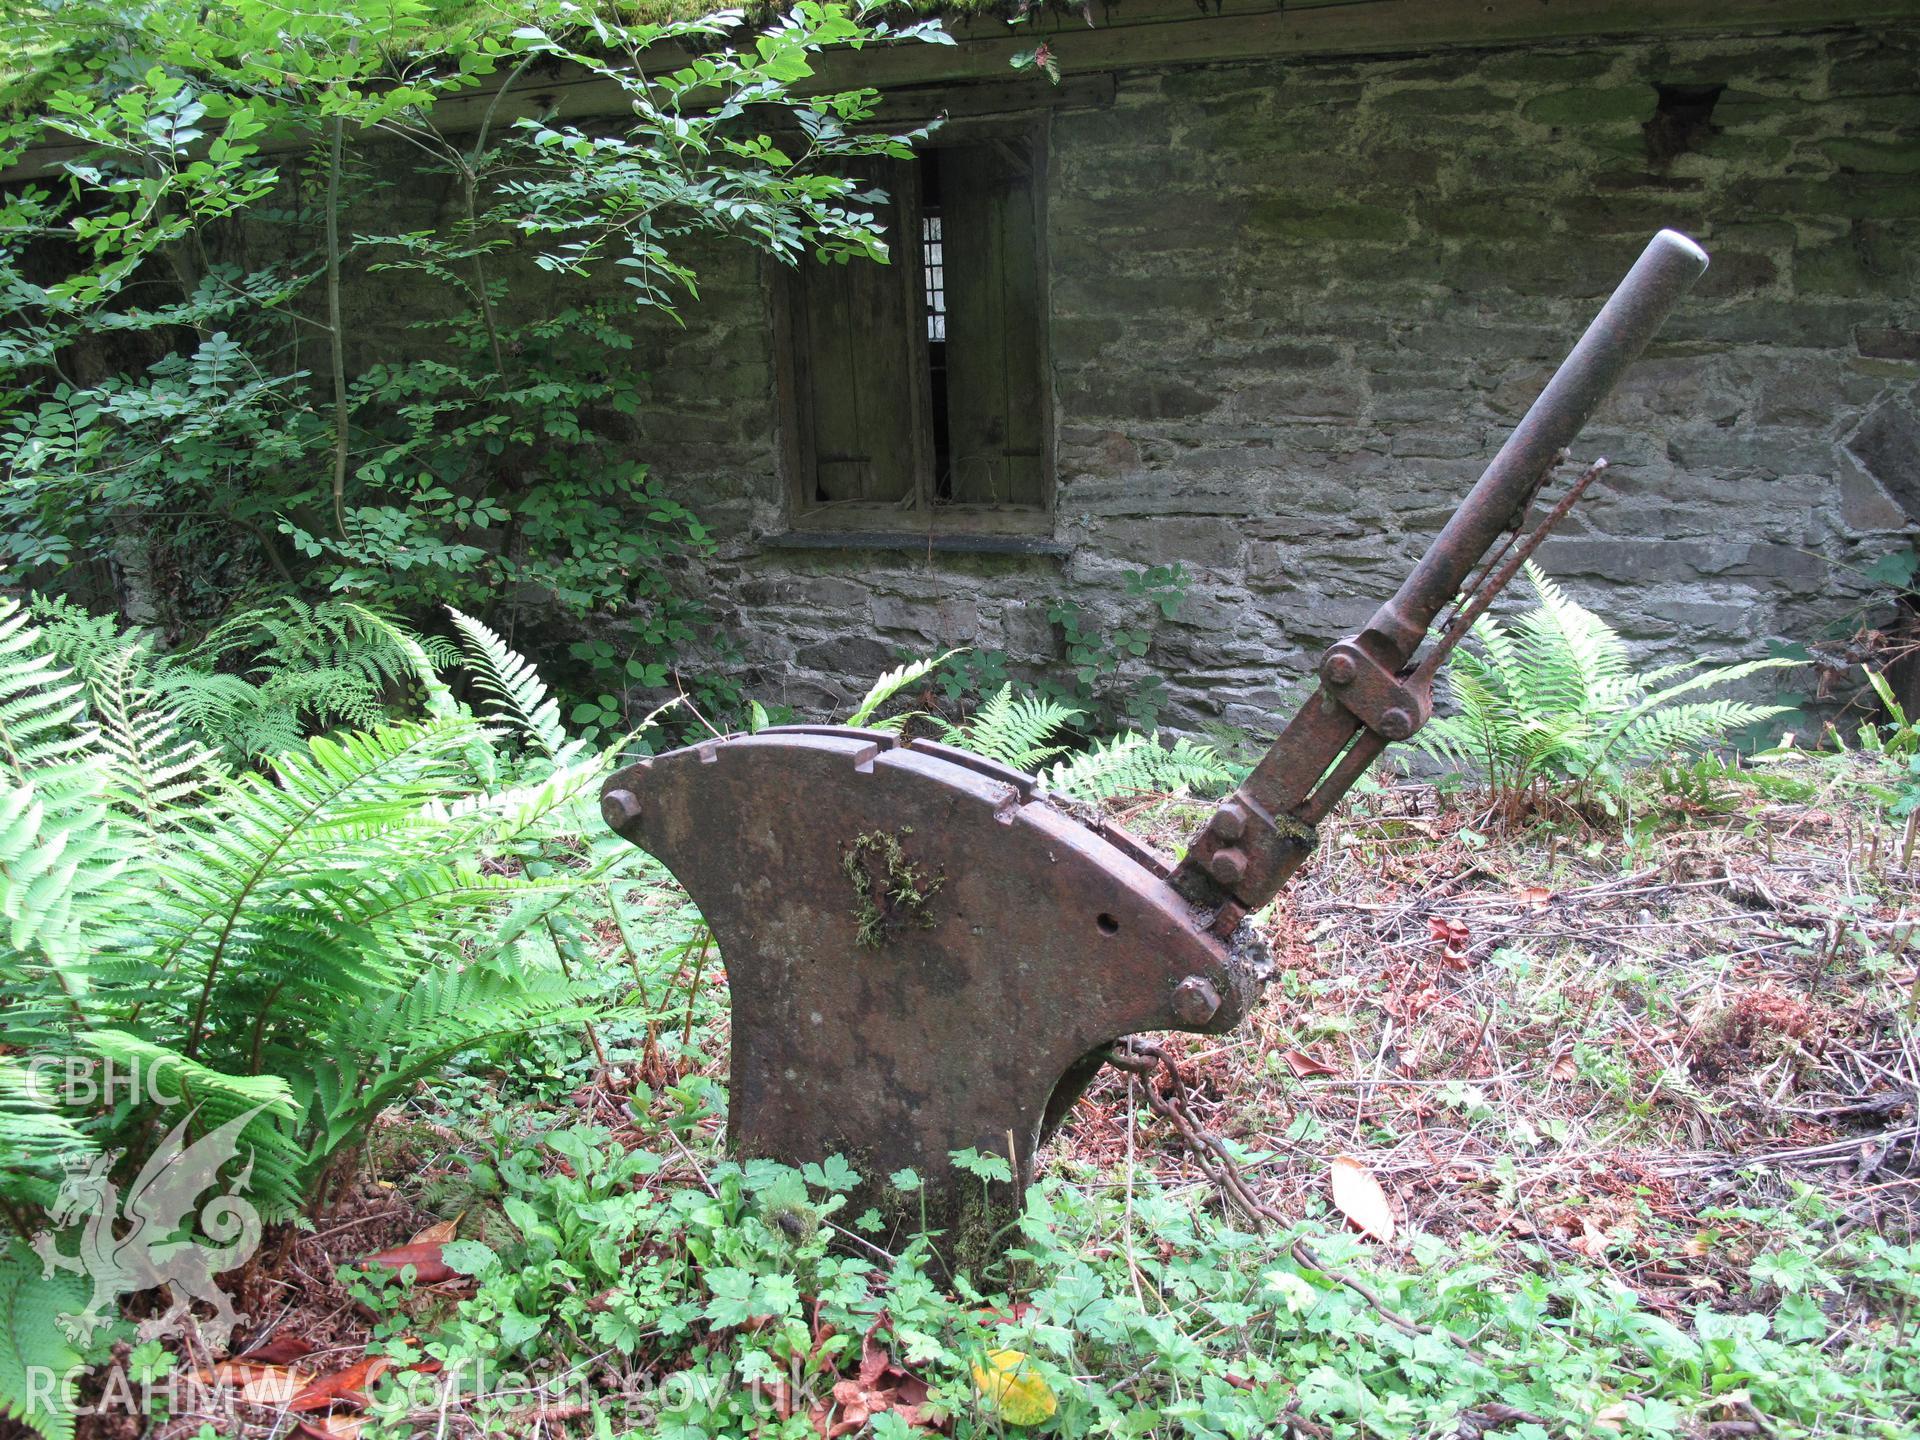 Control lever for water inlet, Furnace Mill, Bodnant.